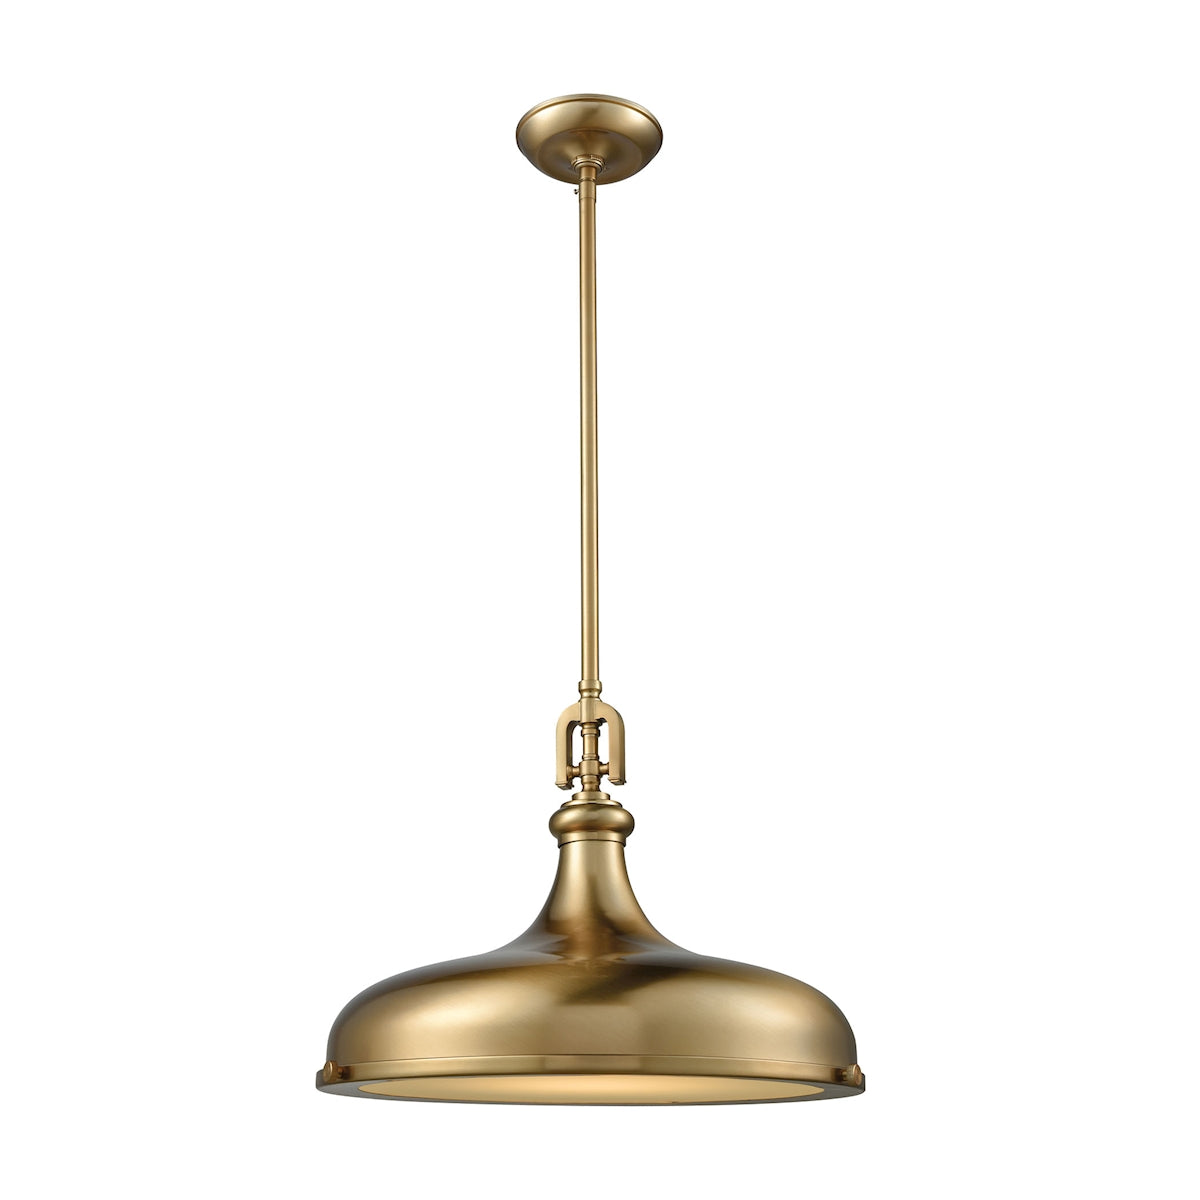 ELK Lighting 57072/1 Rutherford 1-Light Pendant in Satin Brass with Metal Shade